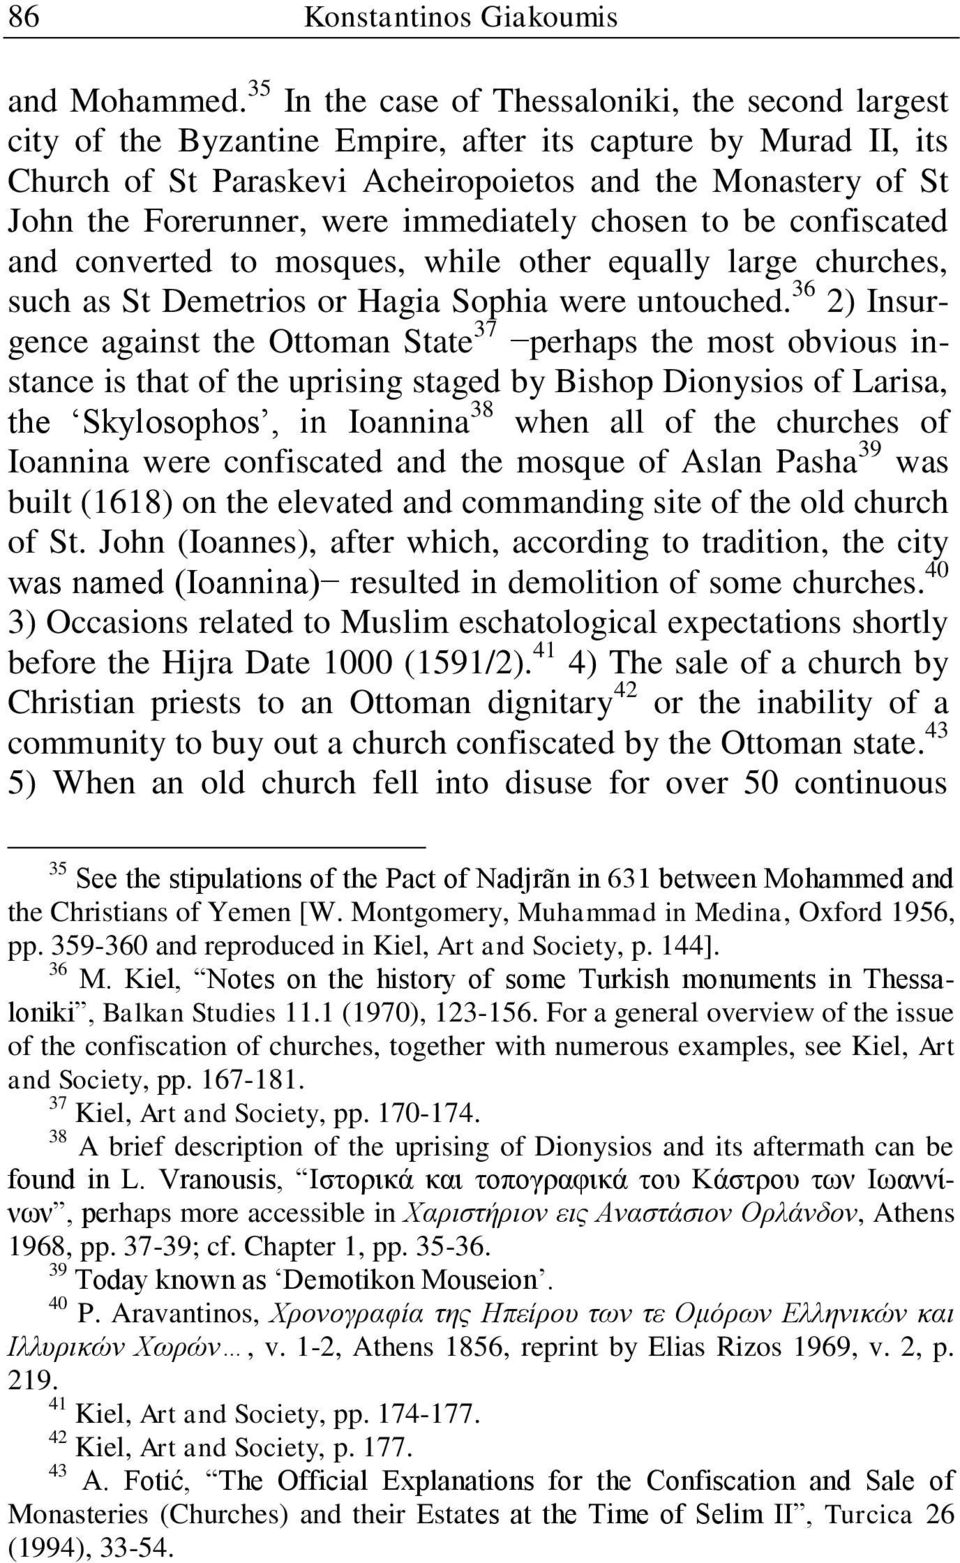 were immediately chosen to be confiscated and converted to mosques, while other equally large churches, such as St Demetrios or Hagia Sophia were untouched.